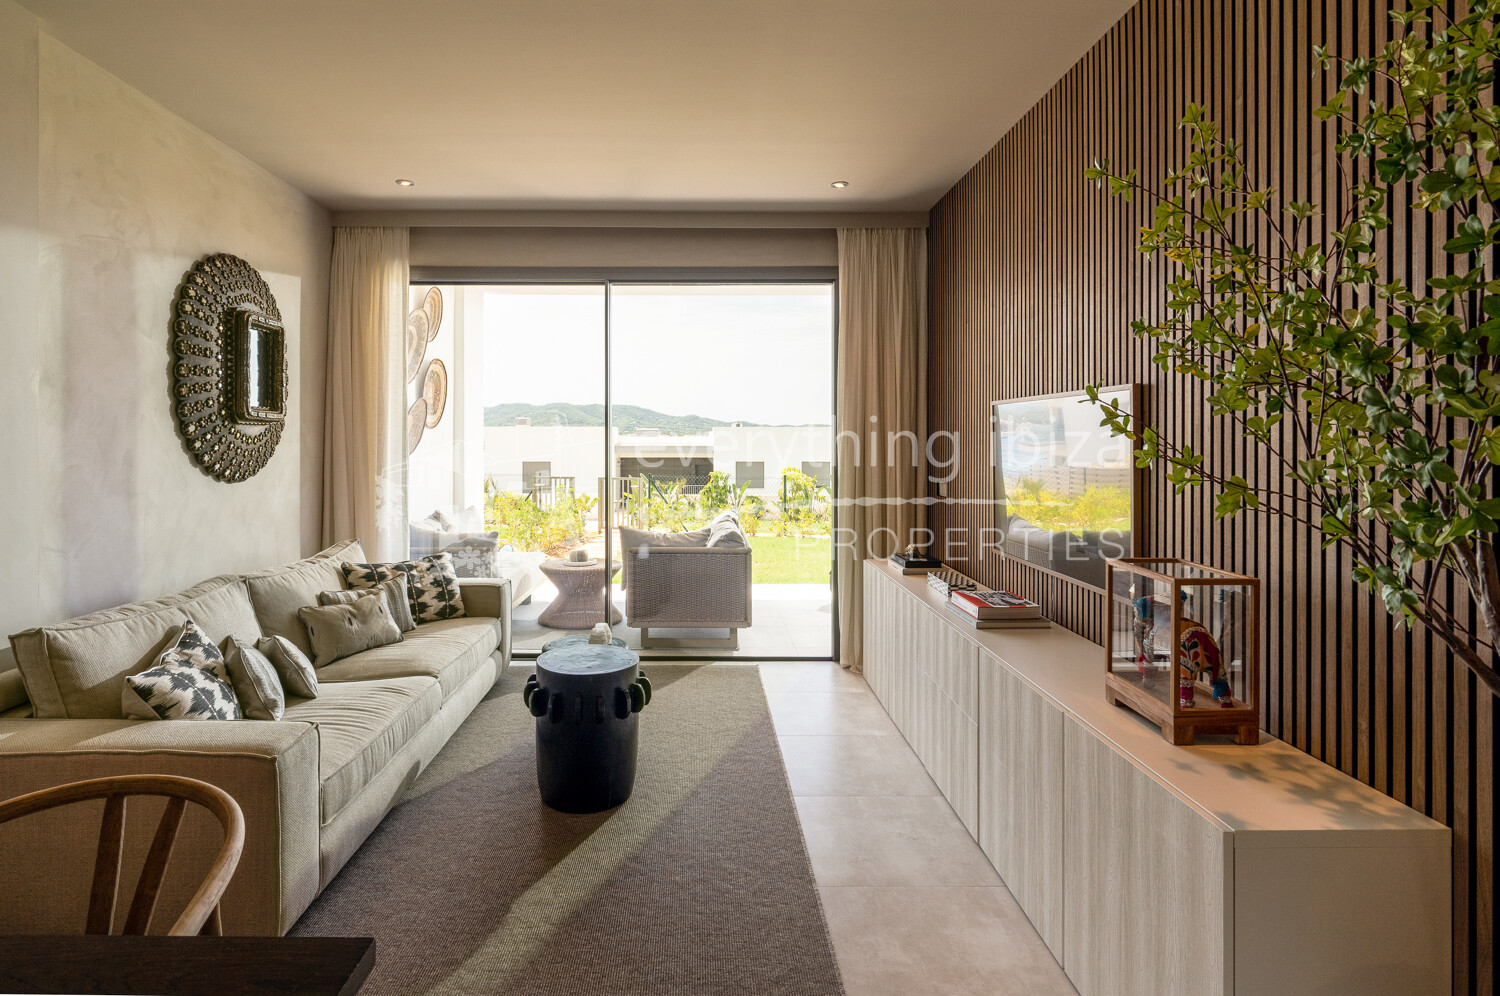 Beautiful Contemporary 2 Bed Apartment with Garden & Impressive Views, ref. 1727, for sale in Ibiza by everything ibiza Properties